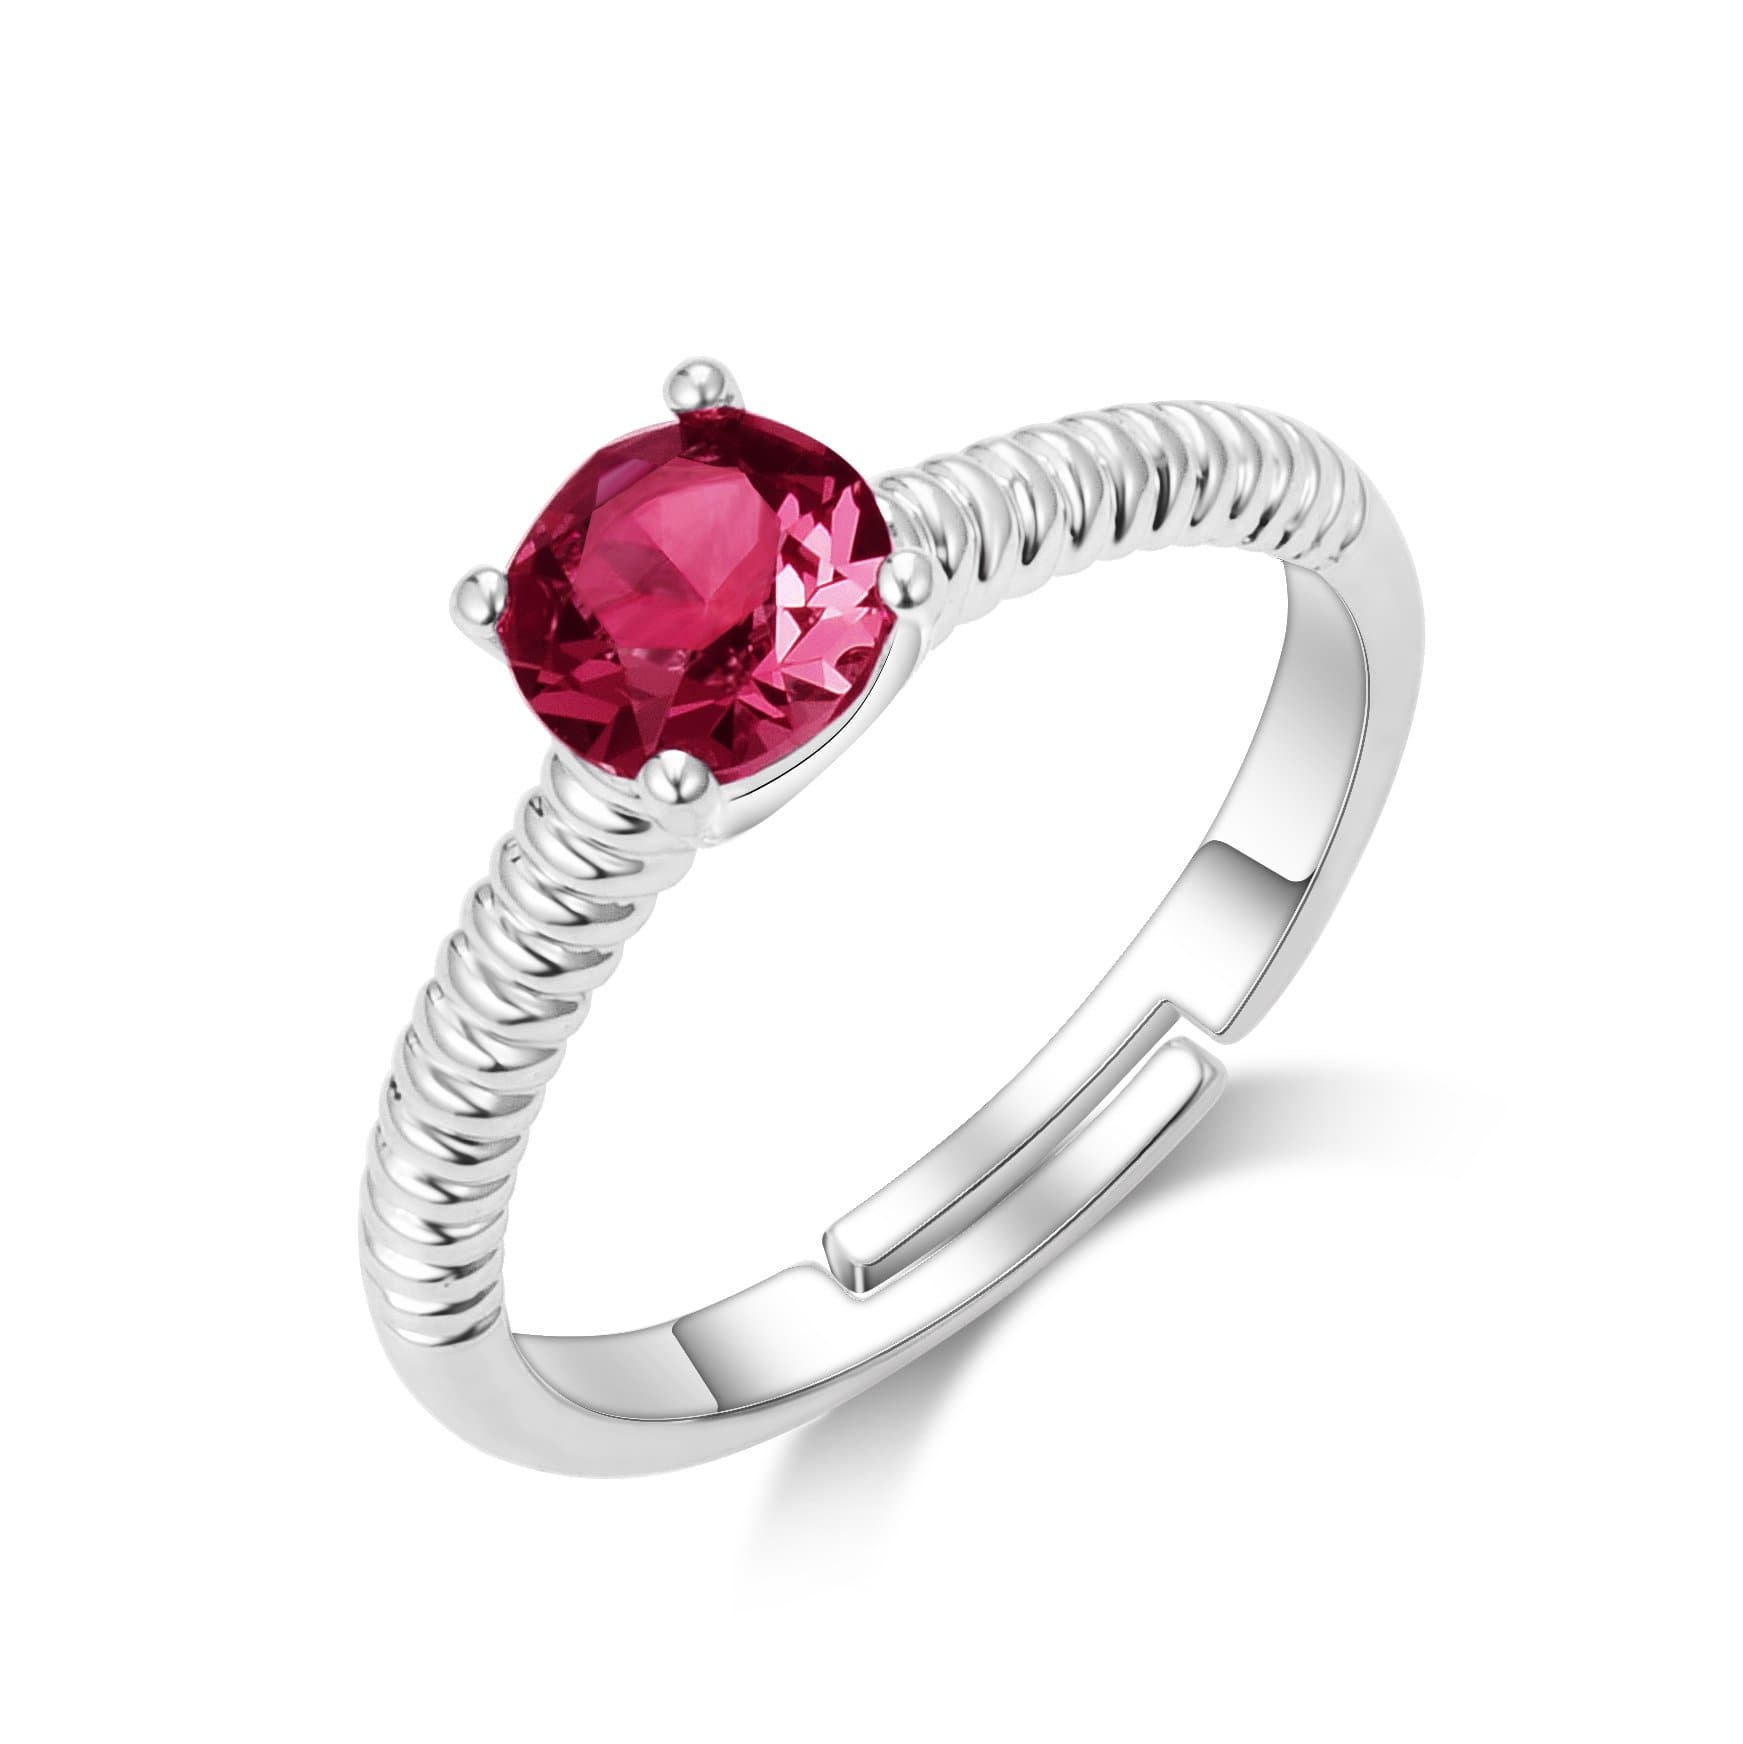 Dark Red Adjustable Crystal Ring Created with Zircondia® Crystals